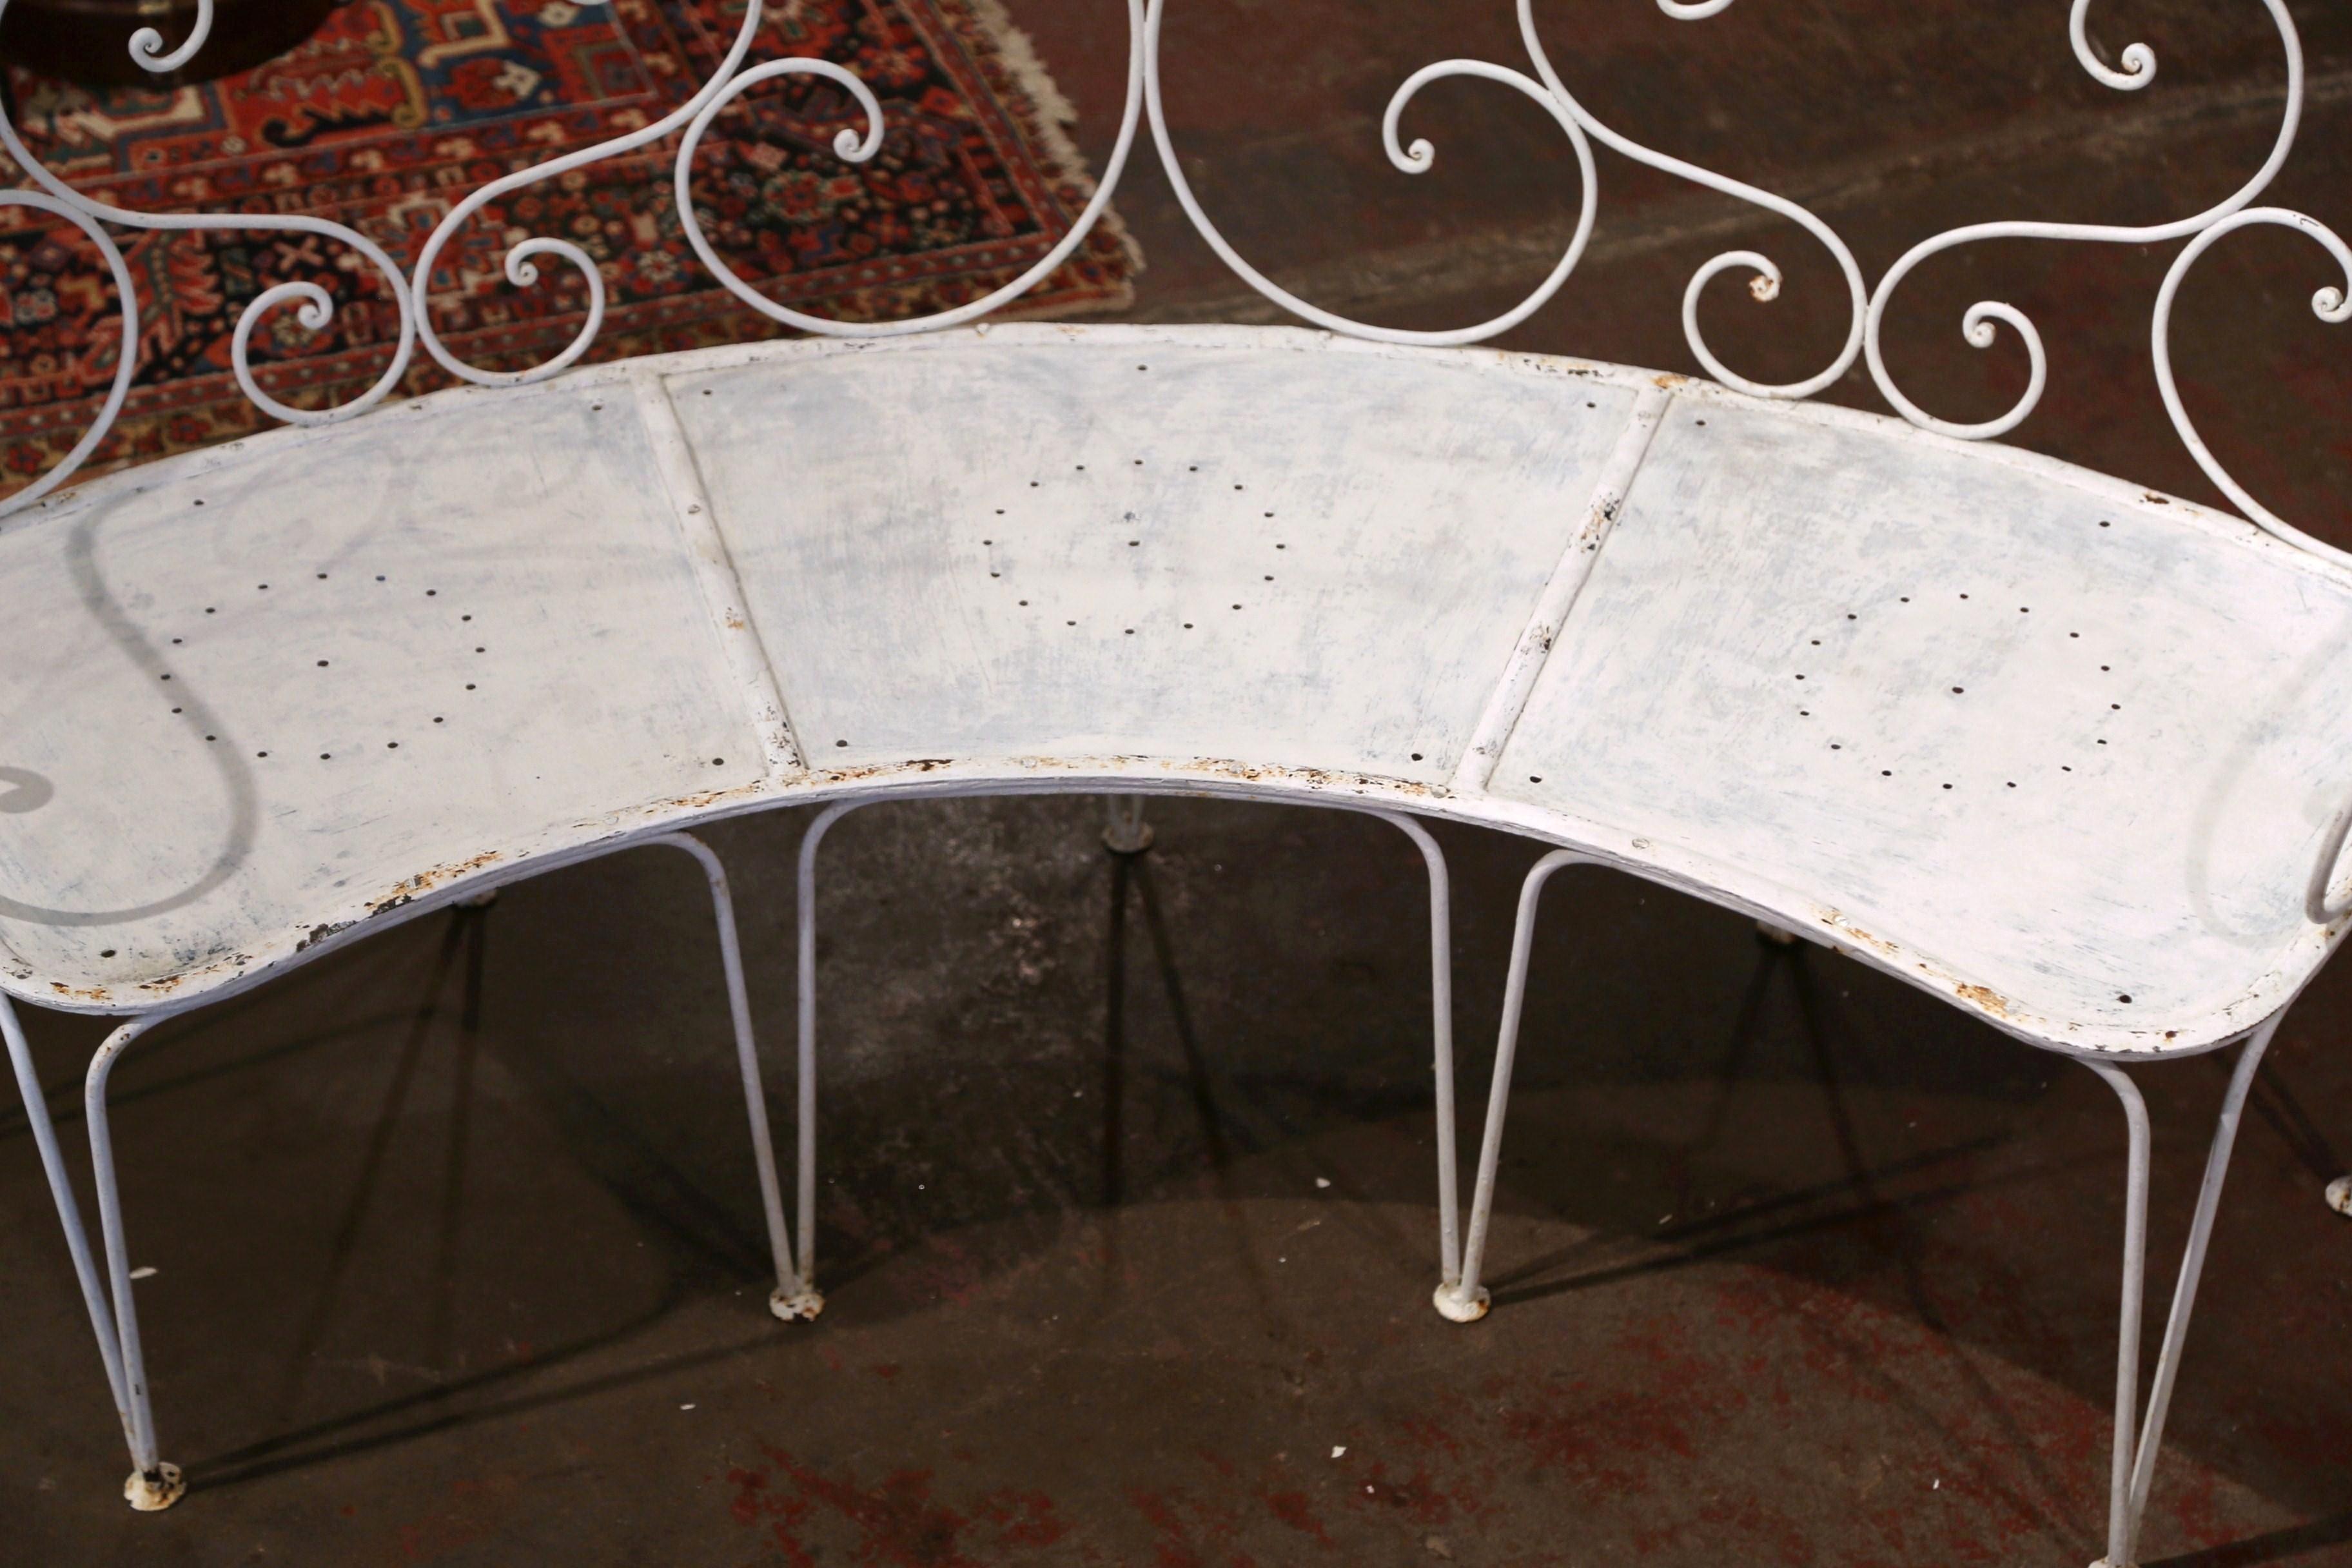 Hand-Crafted 19th Century French Curved Painted Iron Three-Seat Garden Bench from Normandy